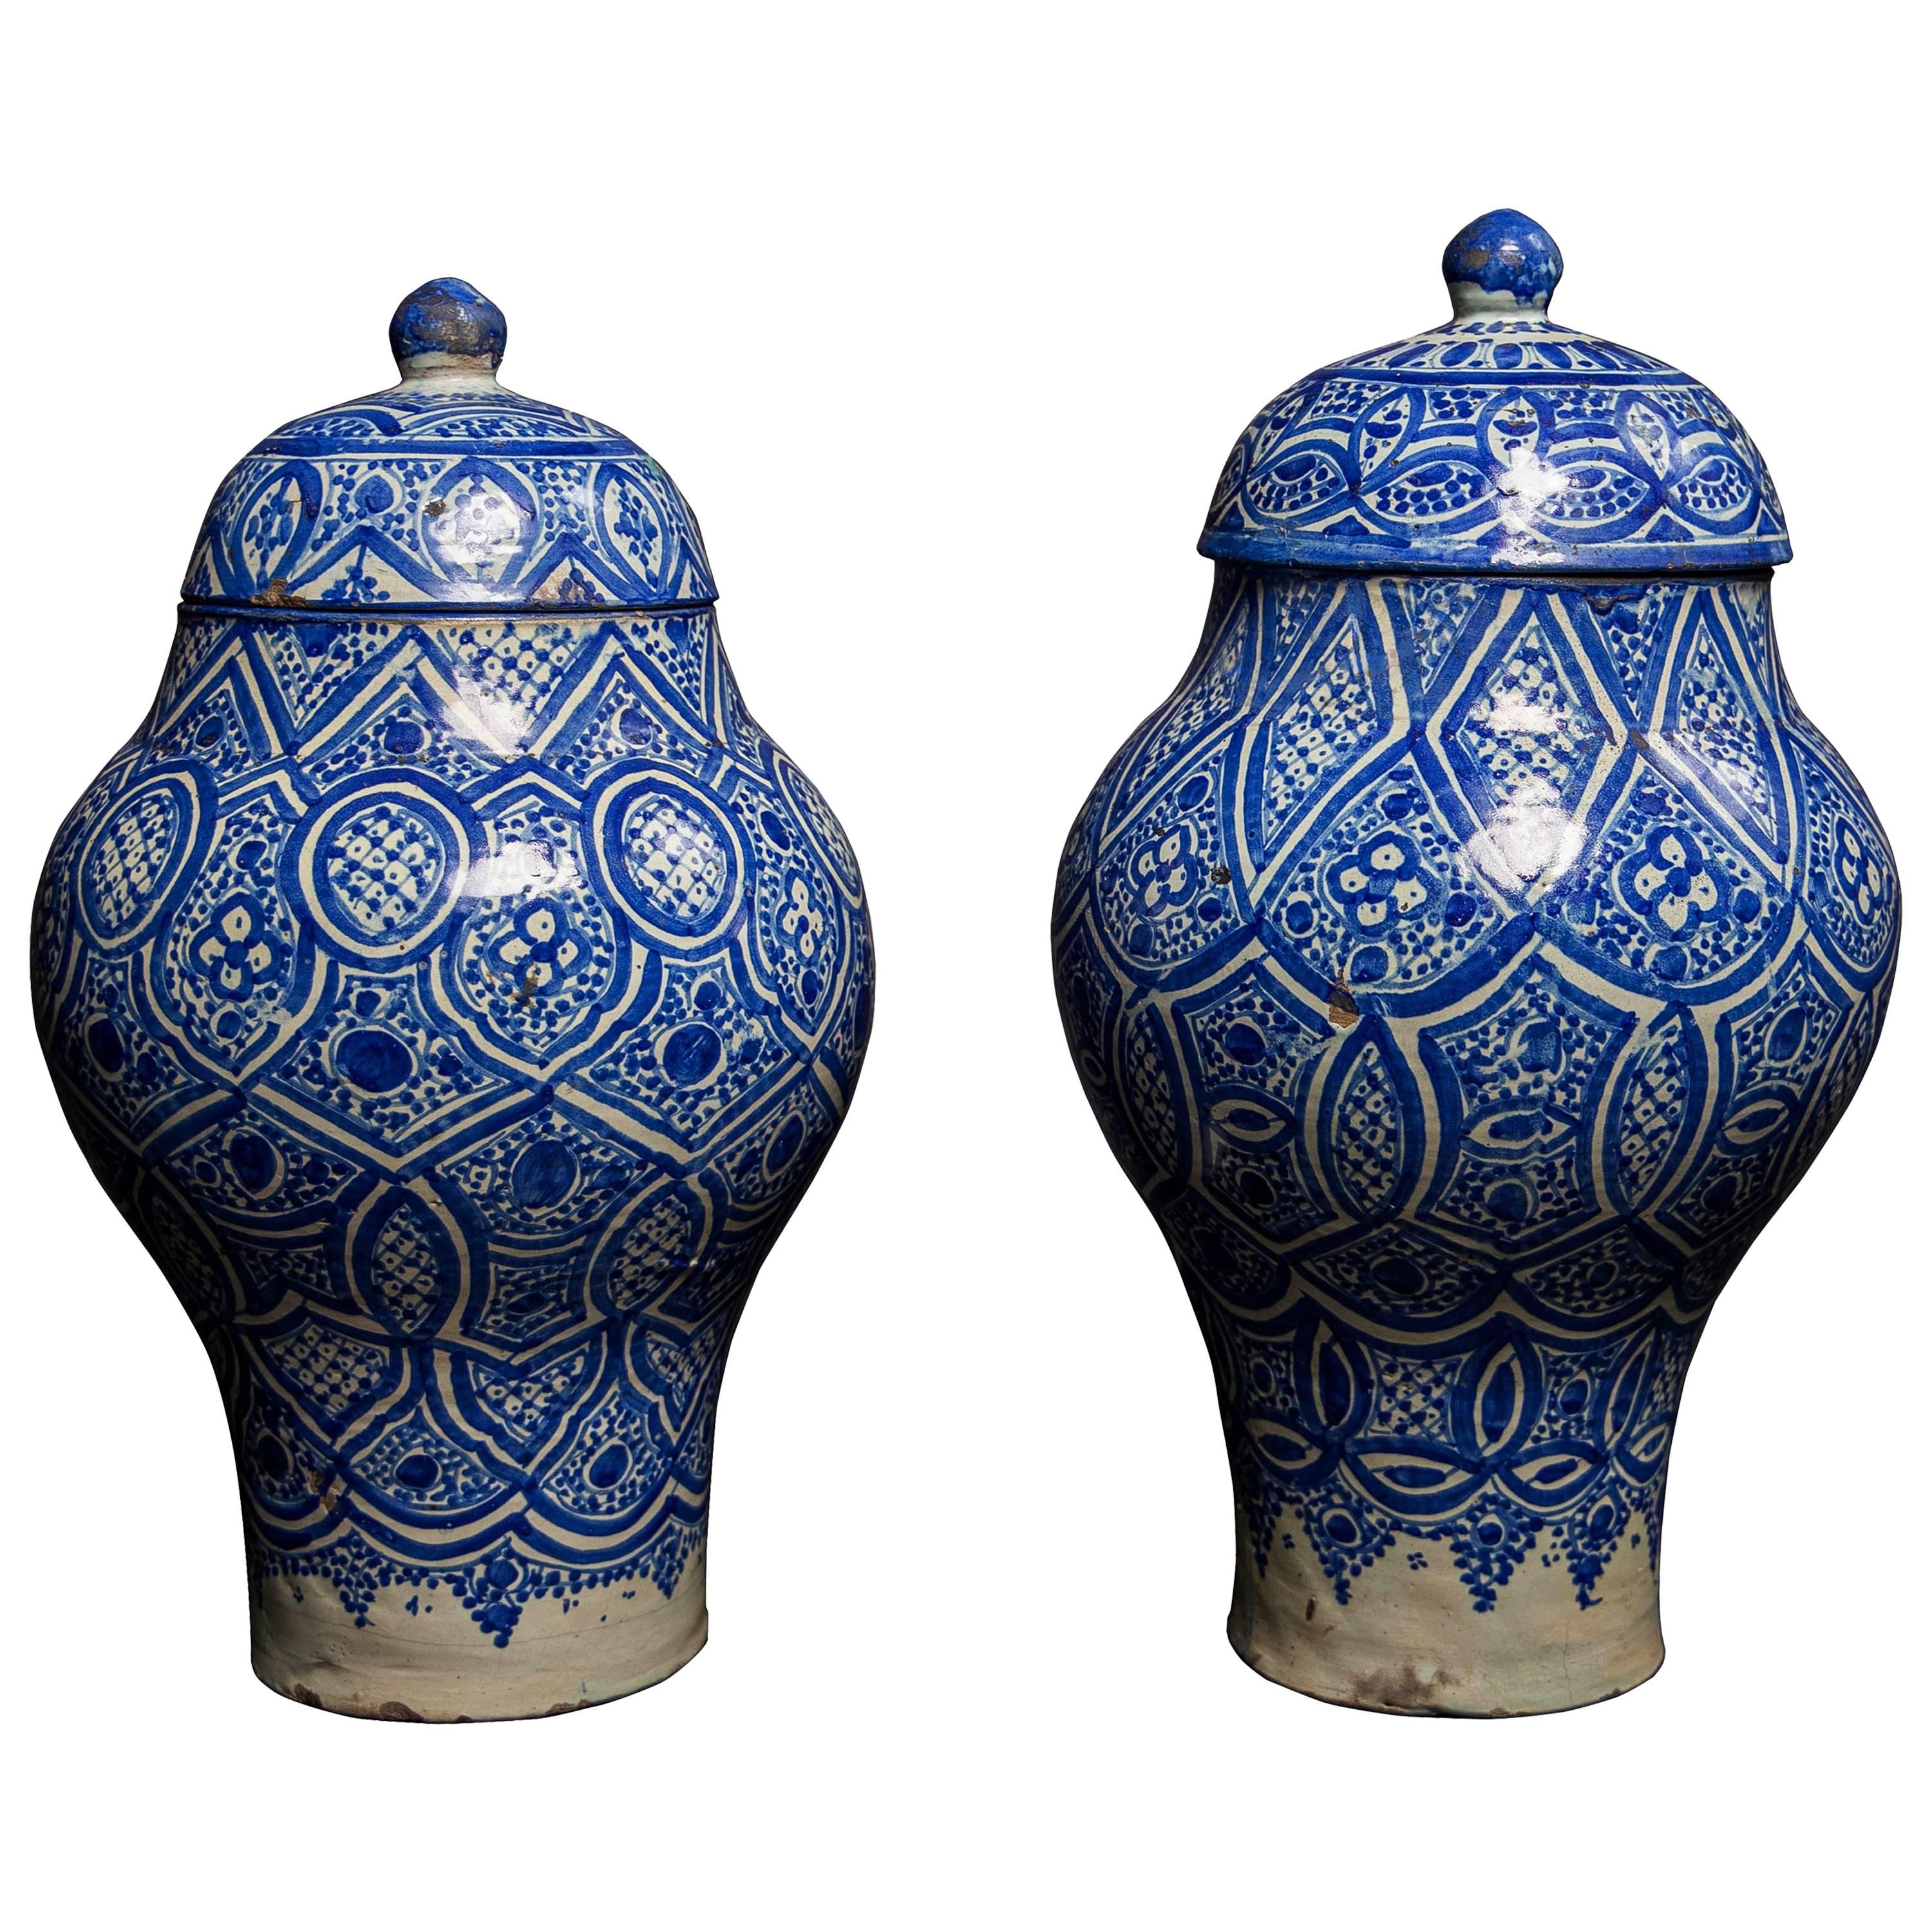 Pair of Geometric Design Moroccan Preserving Jars, Fez Pottery Late 19th Century